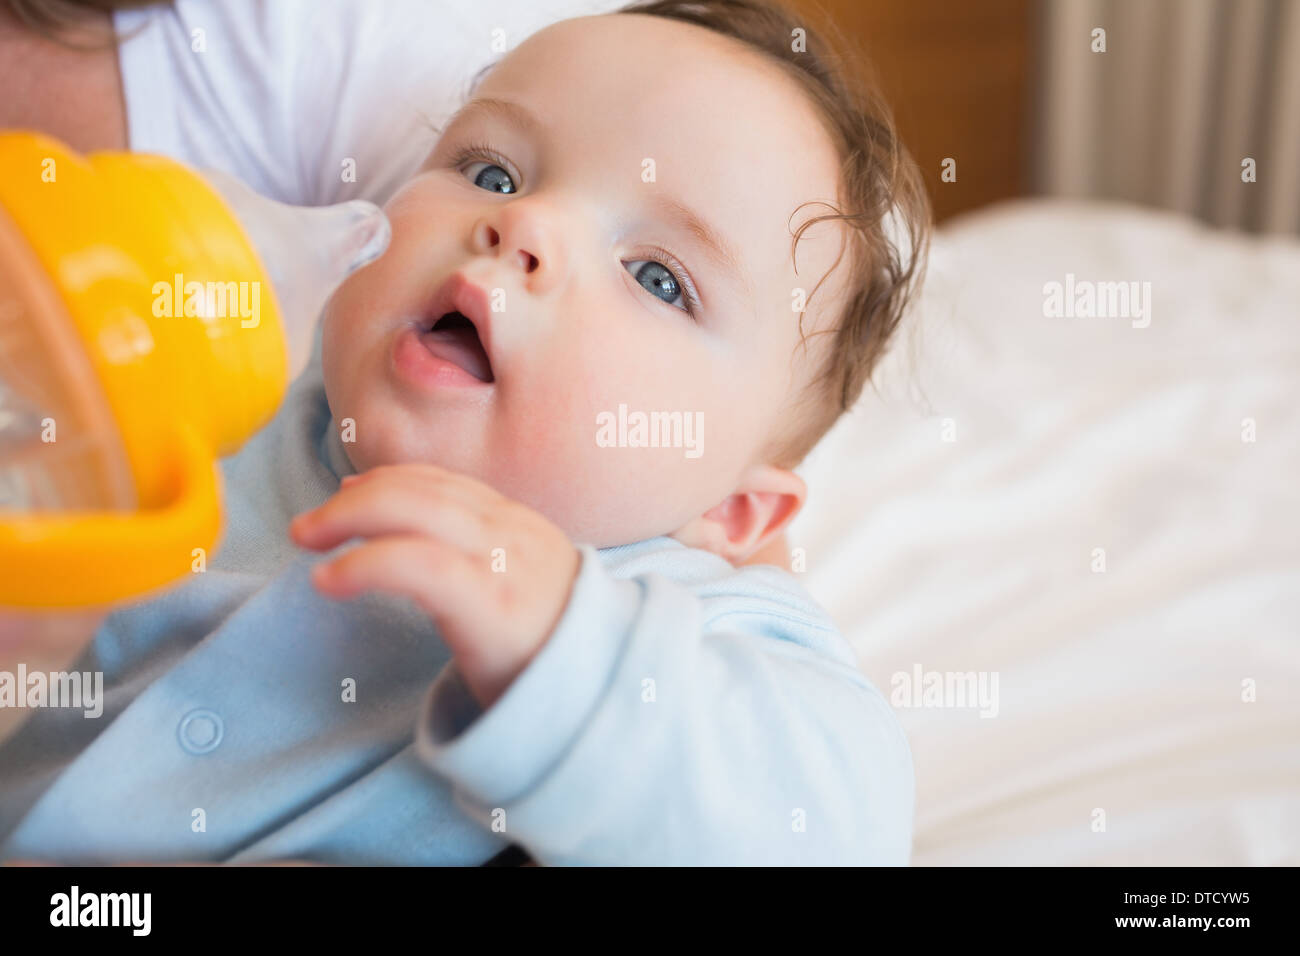 Baby being feed by mother Stock Photo